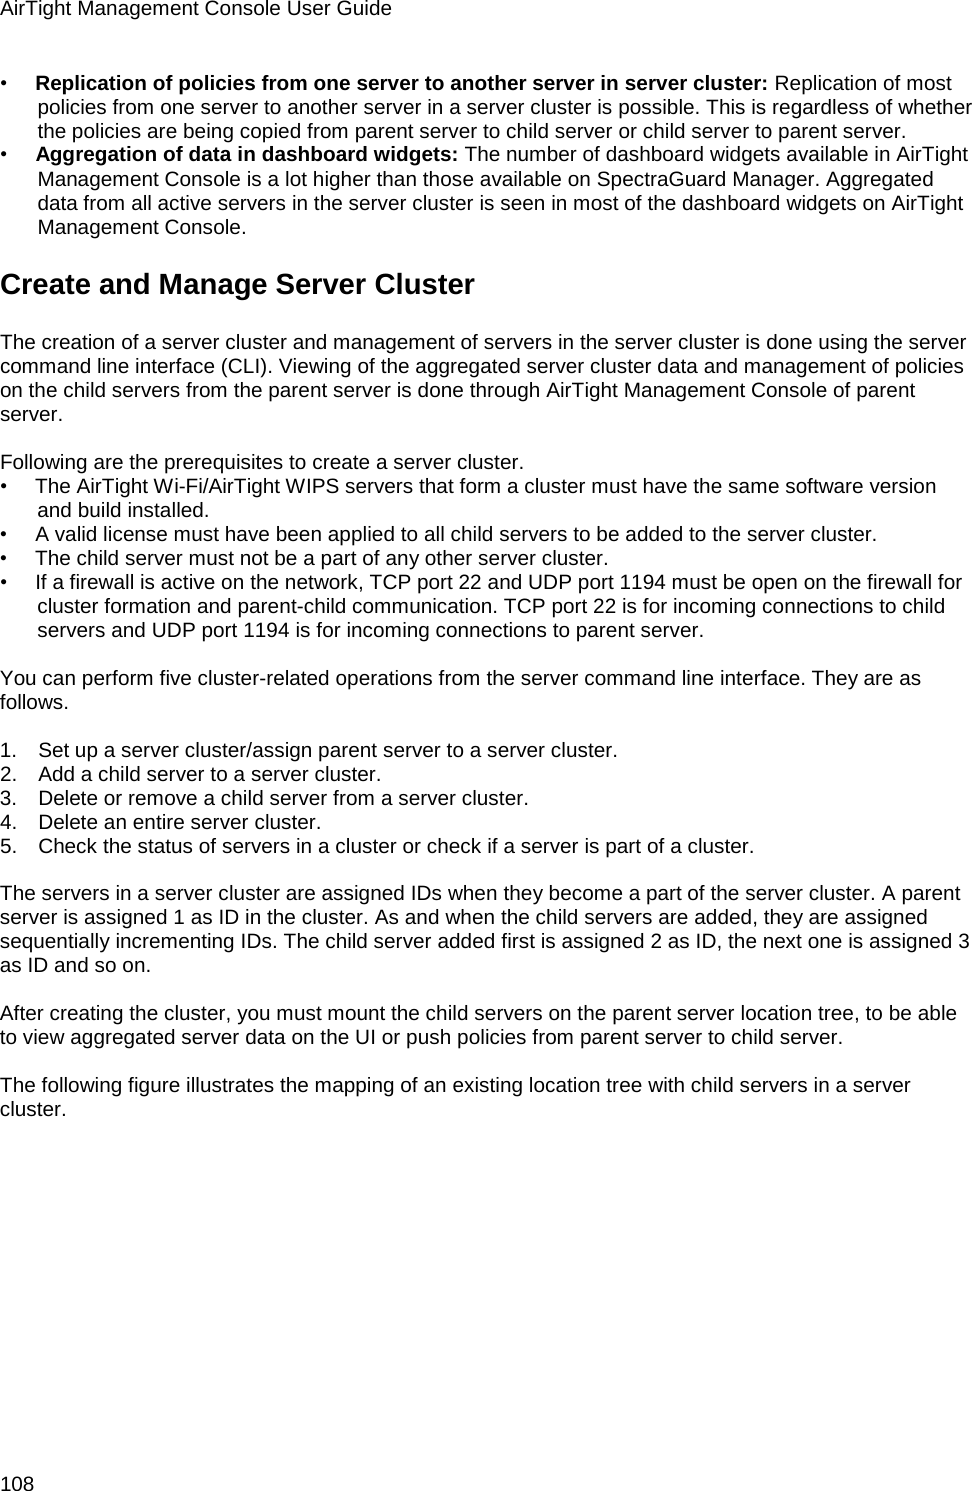 AirTight Management Console User Guide 108 •        Replication of policies from one server to another server in server cluster: Replication of most policies from one server to another server in a server cluster is possible. This is regardless of whether the policies are being copied from parent server to child server or child server to parent server. •        Aggregation of data in dashboard widgets: The number of dashboard widgets available in AirTight Management Console is a lot higher than those available on SpectraGuard Manager. Aggregated data from all active servers in the server cluster is seen in most of the dashboard widgets on AirTight Management Console. Create and Manage Server Cluster The creation of a server cluster and management of servers in the server cluster is done using the server command line interface (CLI). Viewing of the aggregated server cluster data and management of policies on the child servers from the parent server is done through AirTight Management Console of parent server.   Following are the prerequisites to create a server cluster. •        The AirTight Wi-Fi/AirTight WIPS servers that form a cluster must have the same software version and build installed. •        A valid license must have been applied to all child servers to be added to the server cluster. •        The child server must not be a part of any other server cluster. •        If a firewall is active on the network, TCP port 22 and UDP port 1194 must be open on the firewall for cluster formation and parent-child communication. TCP port 22 is for incoming connections to child servers and UDP port 1194 is for incoming connections to parent server.   You can perform five cluster-related operations from the server command line interface. They are as follows.   1.      Set up a server cluster/assign parent server to a server cluster. 2.      Add a child server to a server cluster. 3.      Delete or remove a child server from a server cluster. 4.      Delete an entire server cluster. 5.      Check the status of servers in a cluster or check if a server is part of a cluster.   The servers in a server cluster are assigned IDs when they become a part of the server cluster. A parent server is assigned 1 as ID in the cluster. As and when the child servers are added, they are assigned sequentially incrementing IDs. The child server added first is assigned 2 as ID, the next one is assigned 3 as ID and so on.   After creating the cluster, you must mount the child servers on the parent server location tree, to be able to view aggregated server data on the UI or push policies from parent server to child server.    The following figure illustrates the mapping of an existing location tree with child servers in a server cluster. 